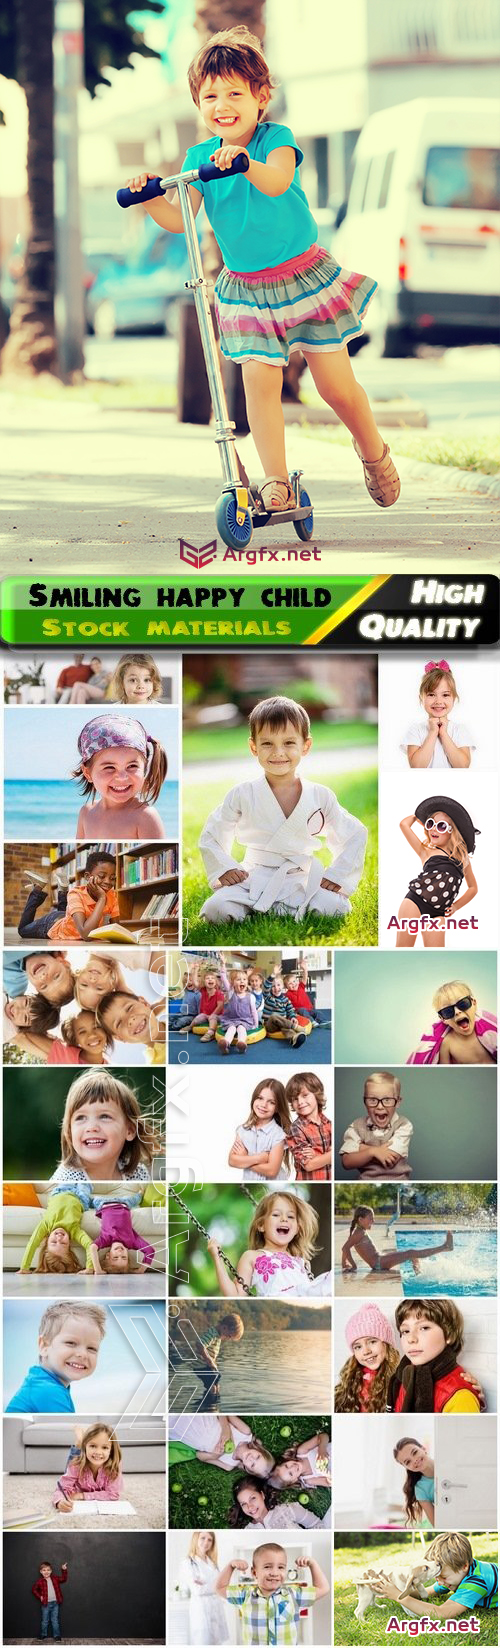  Smiling happy child and kids have fun 25 HQ Jpg